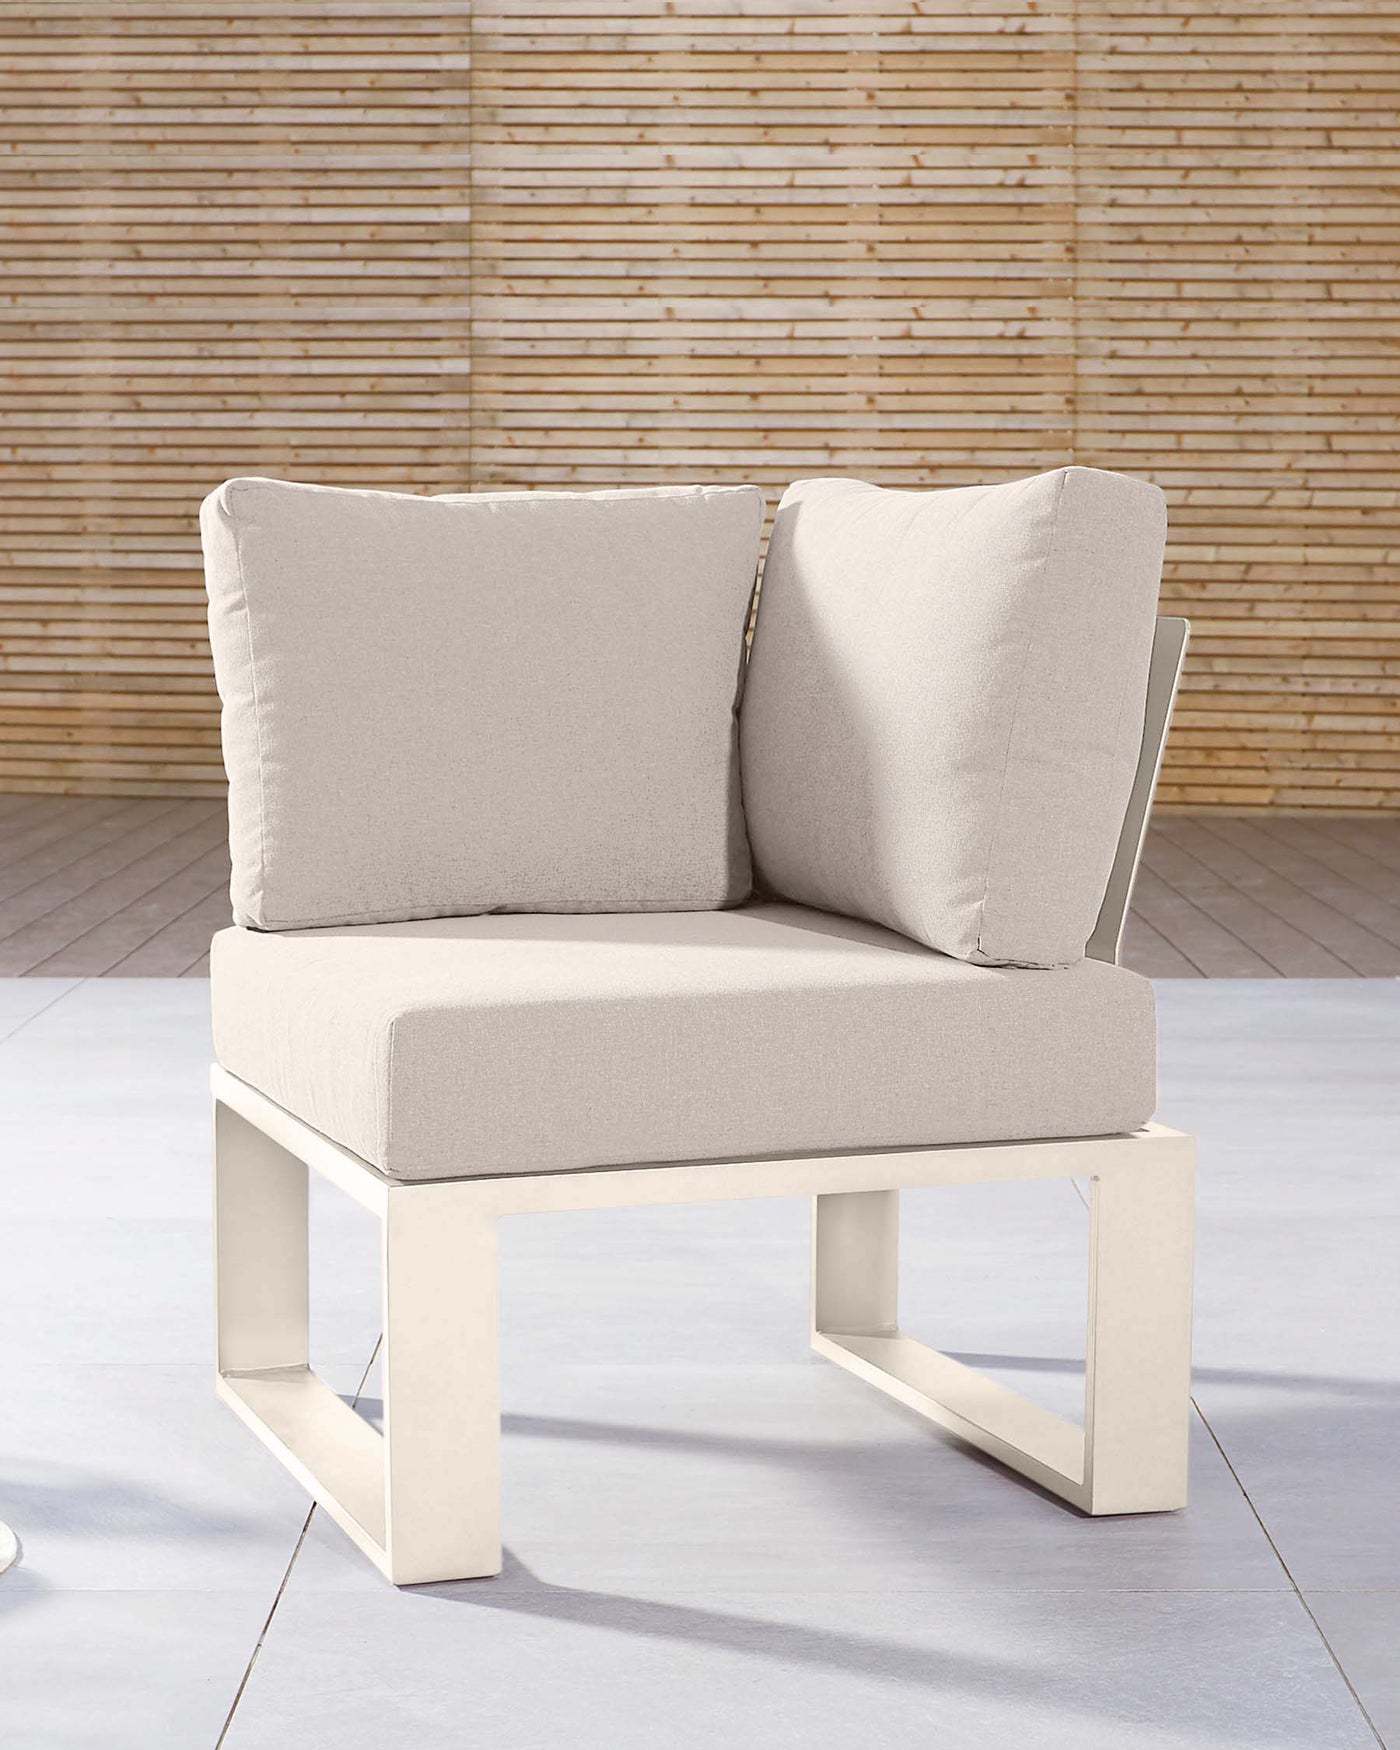 Modern single-seater sofa with a minimalist design, featuring a solid base with a clean-lined rectangular silhouette, upholstered in a light, neutral fabric. The seat is complemented by plush back and side cushions, providing comfort and support. The simple yet stylish piece is set against a bamboo backdrop, suggesting an outdoor or sunlight-filled indoor setting.